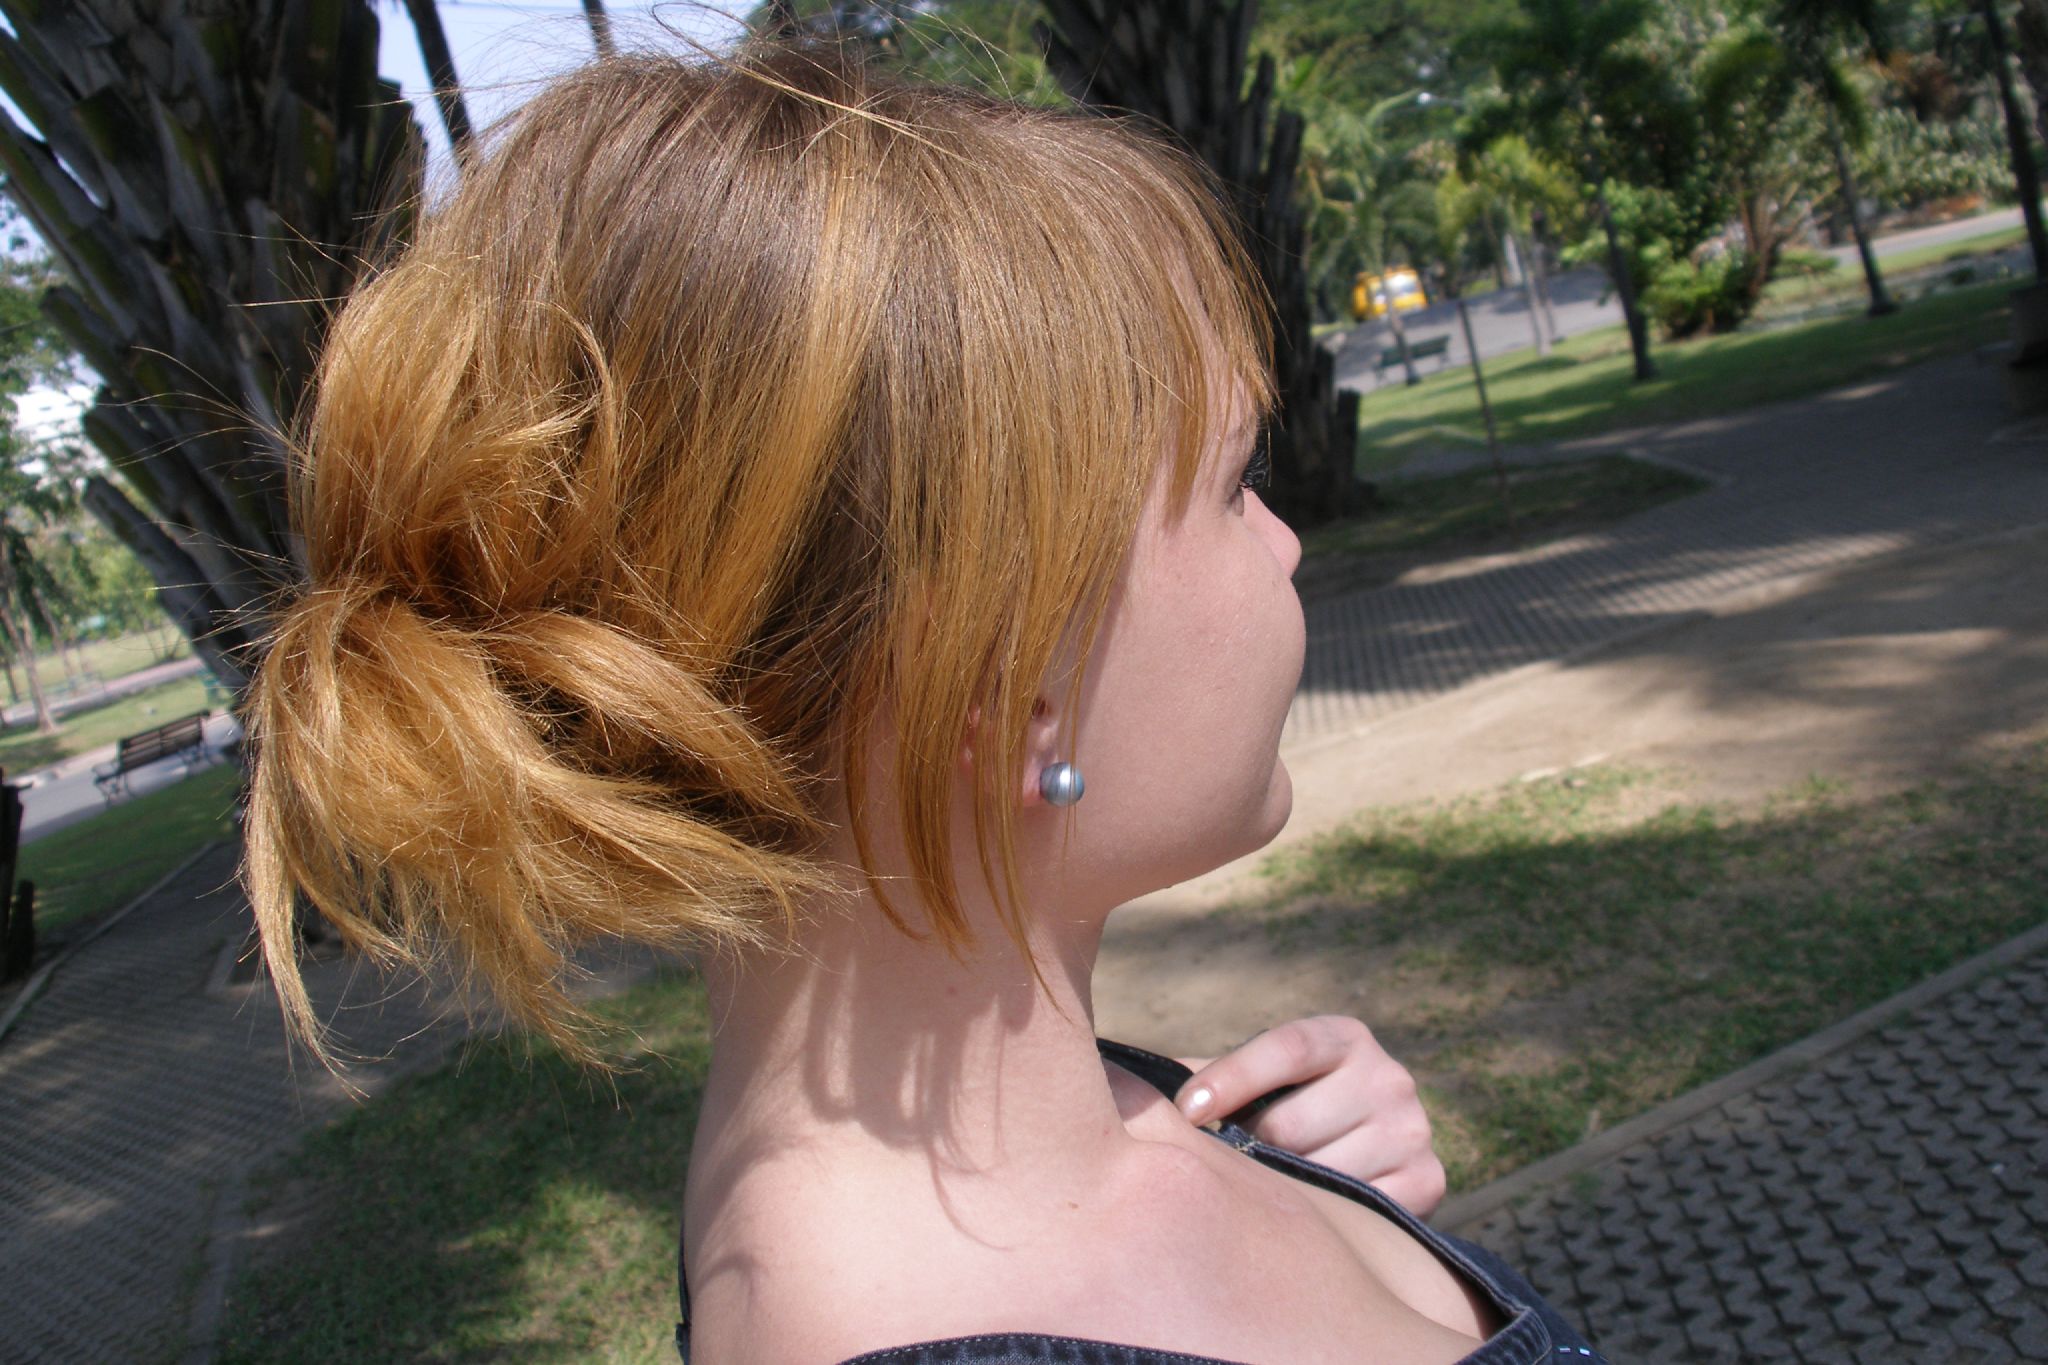 red haired girl with earrings and hair blowing in the wind